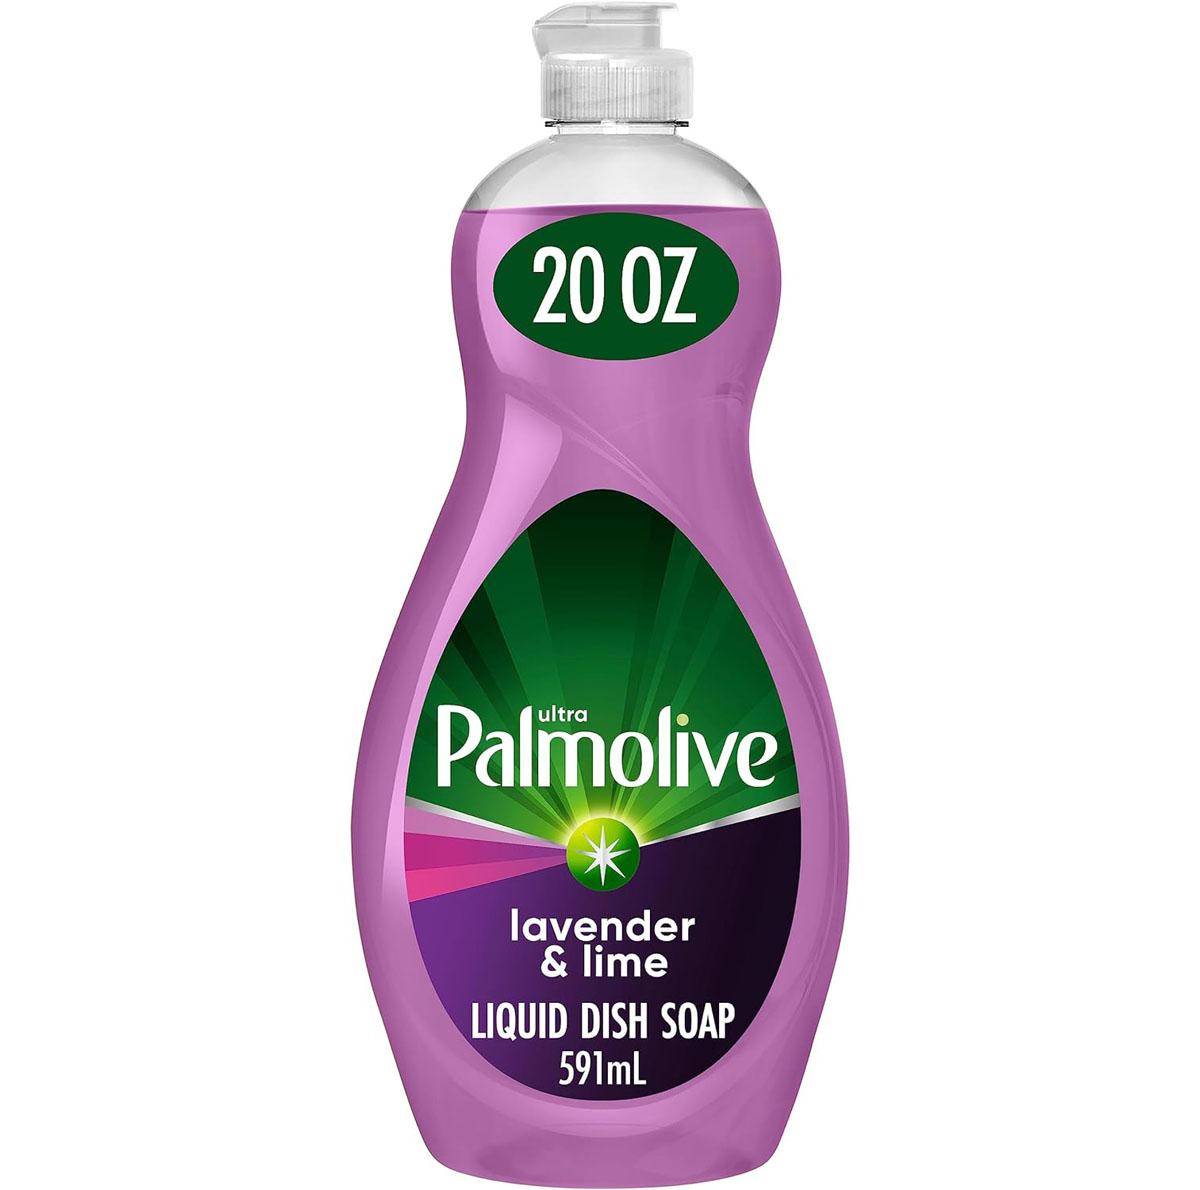 Palmolive Ultra Lavender and Lime Experientials Liquid Dish Soap for $2.28